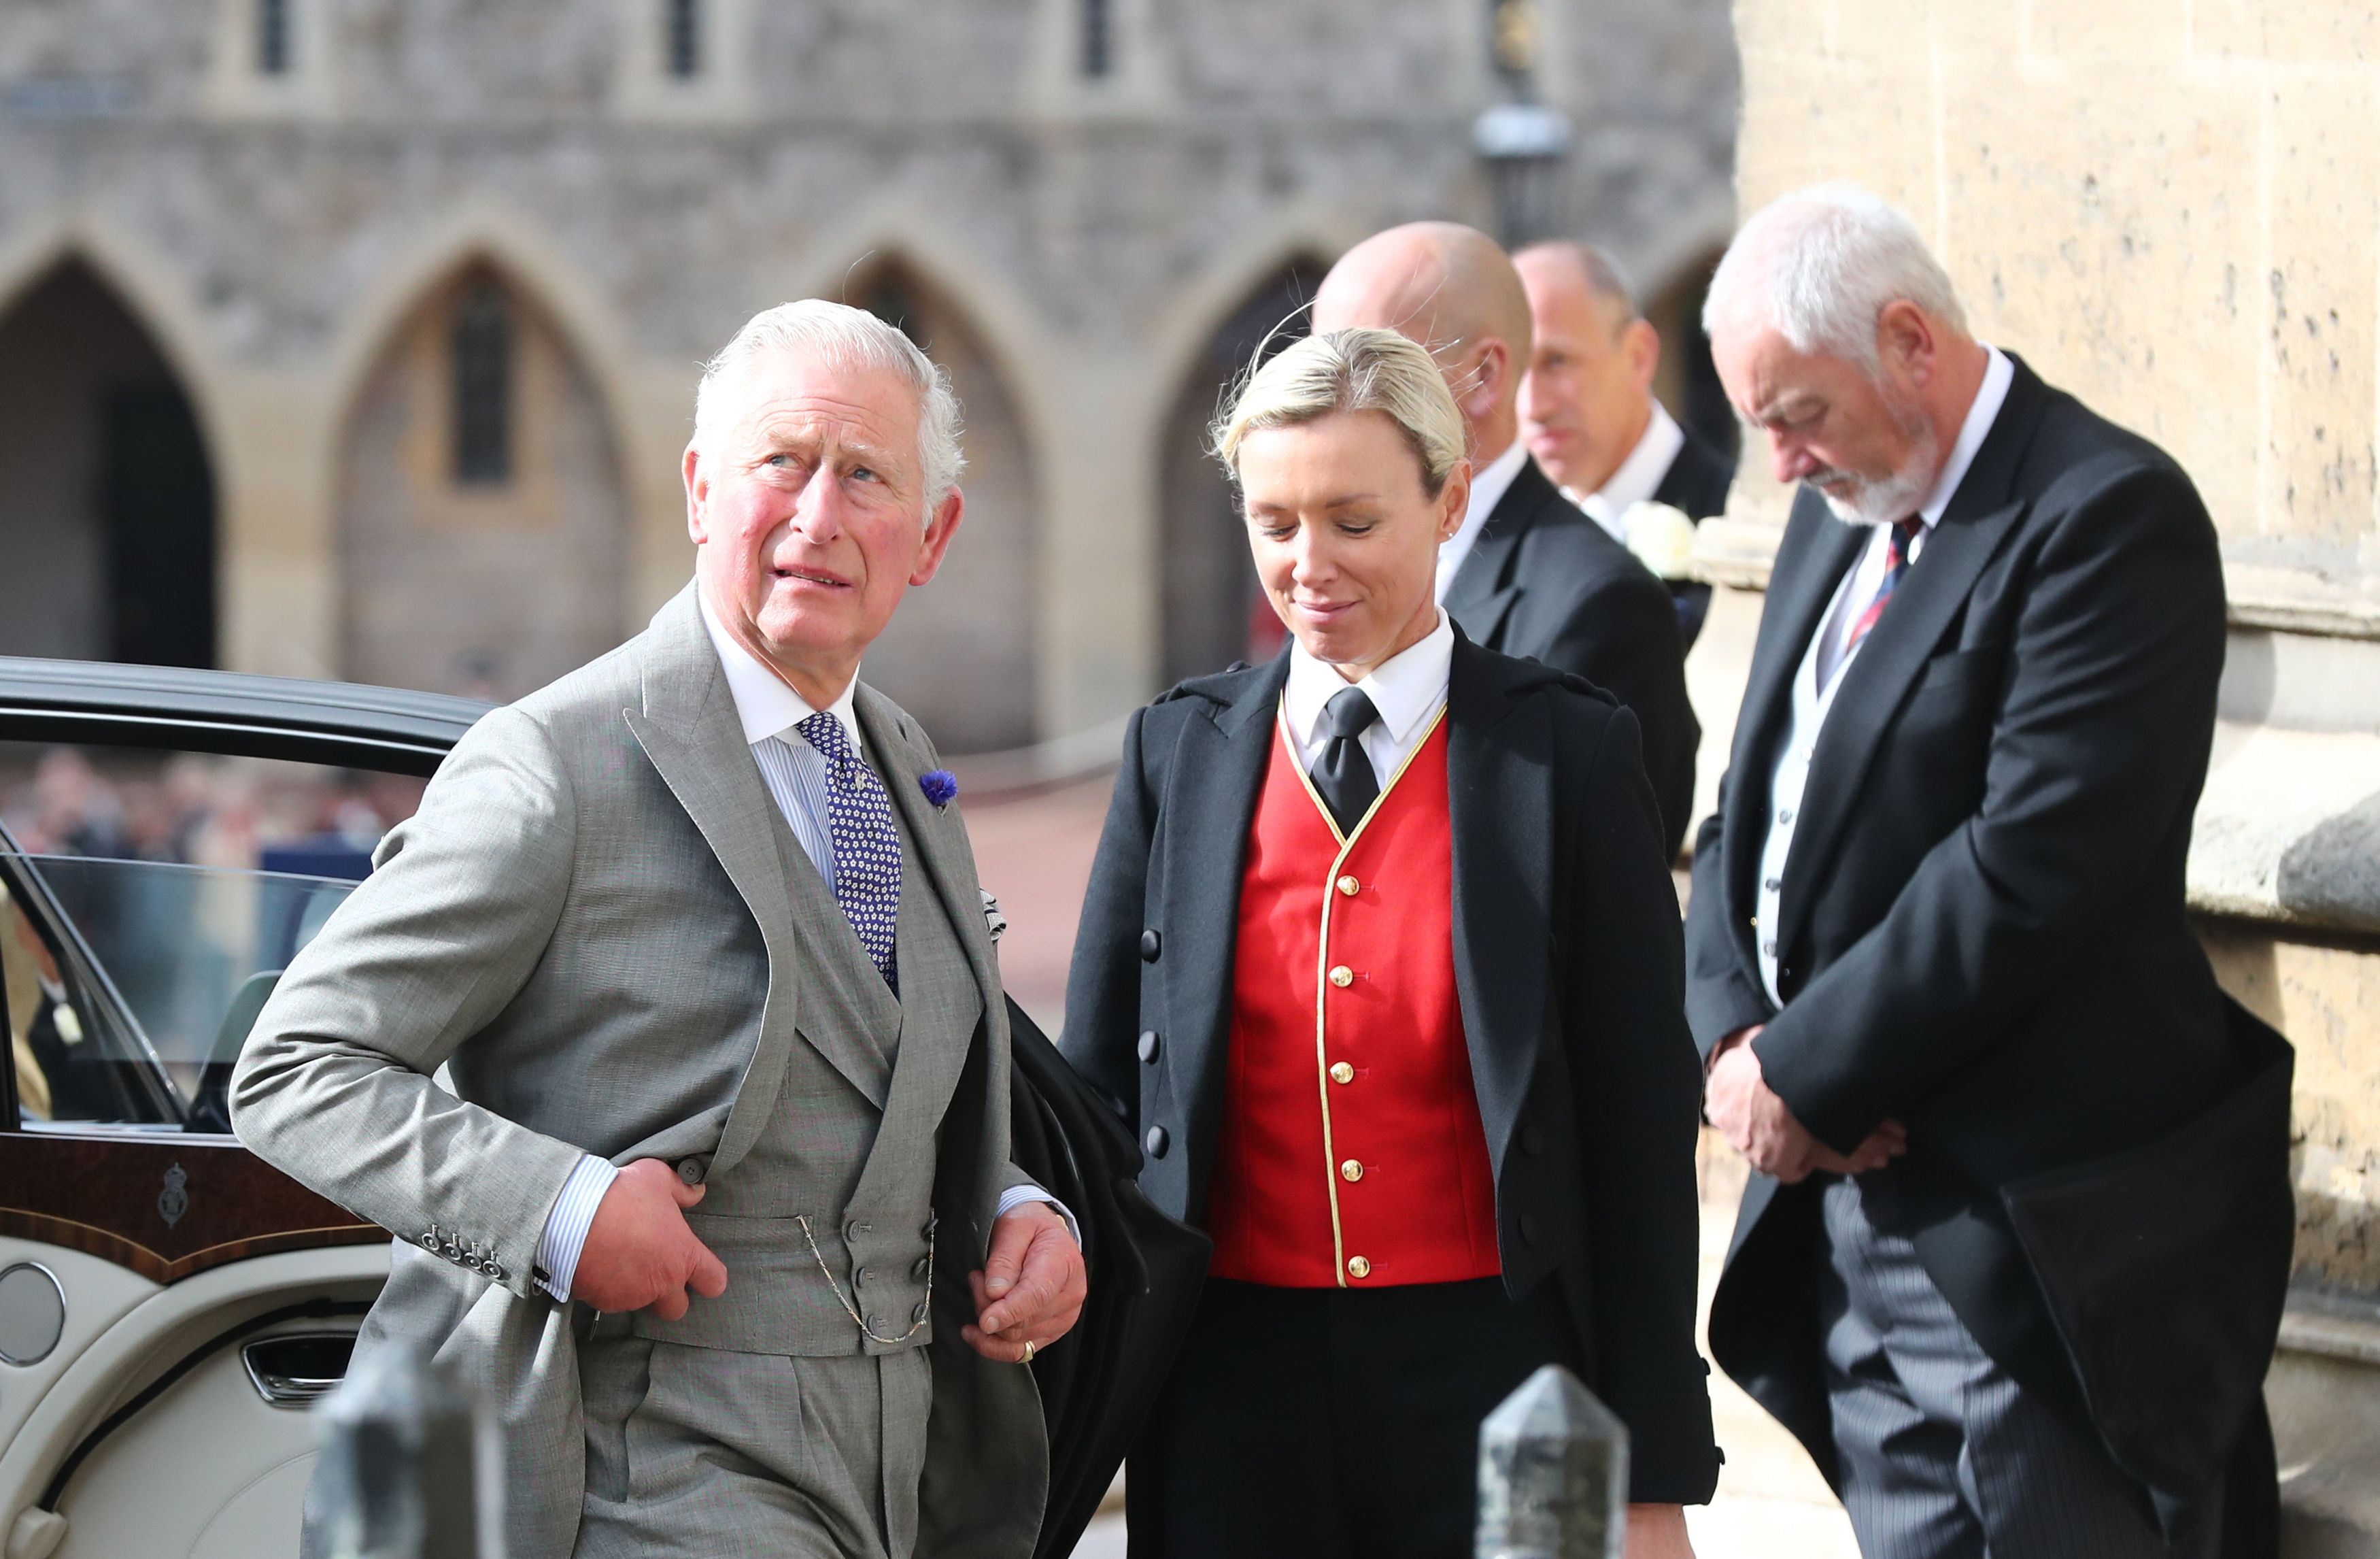 OCT 12: Prince Charles, Prince of Wales attends the wedding of Princess Eugenie of York to Jack Brooksbank at St. George's Chapel in Windsor, England. (WPA Pool—Getty Images)